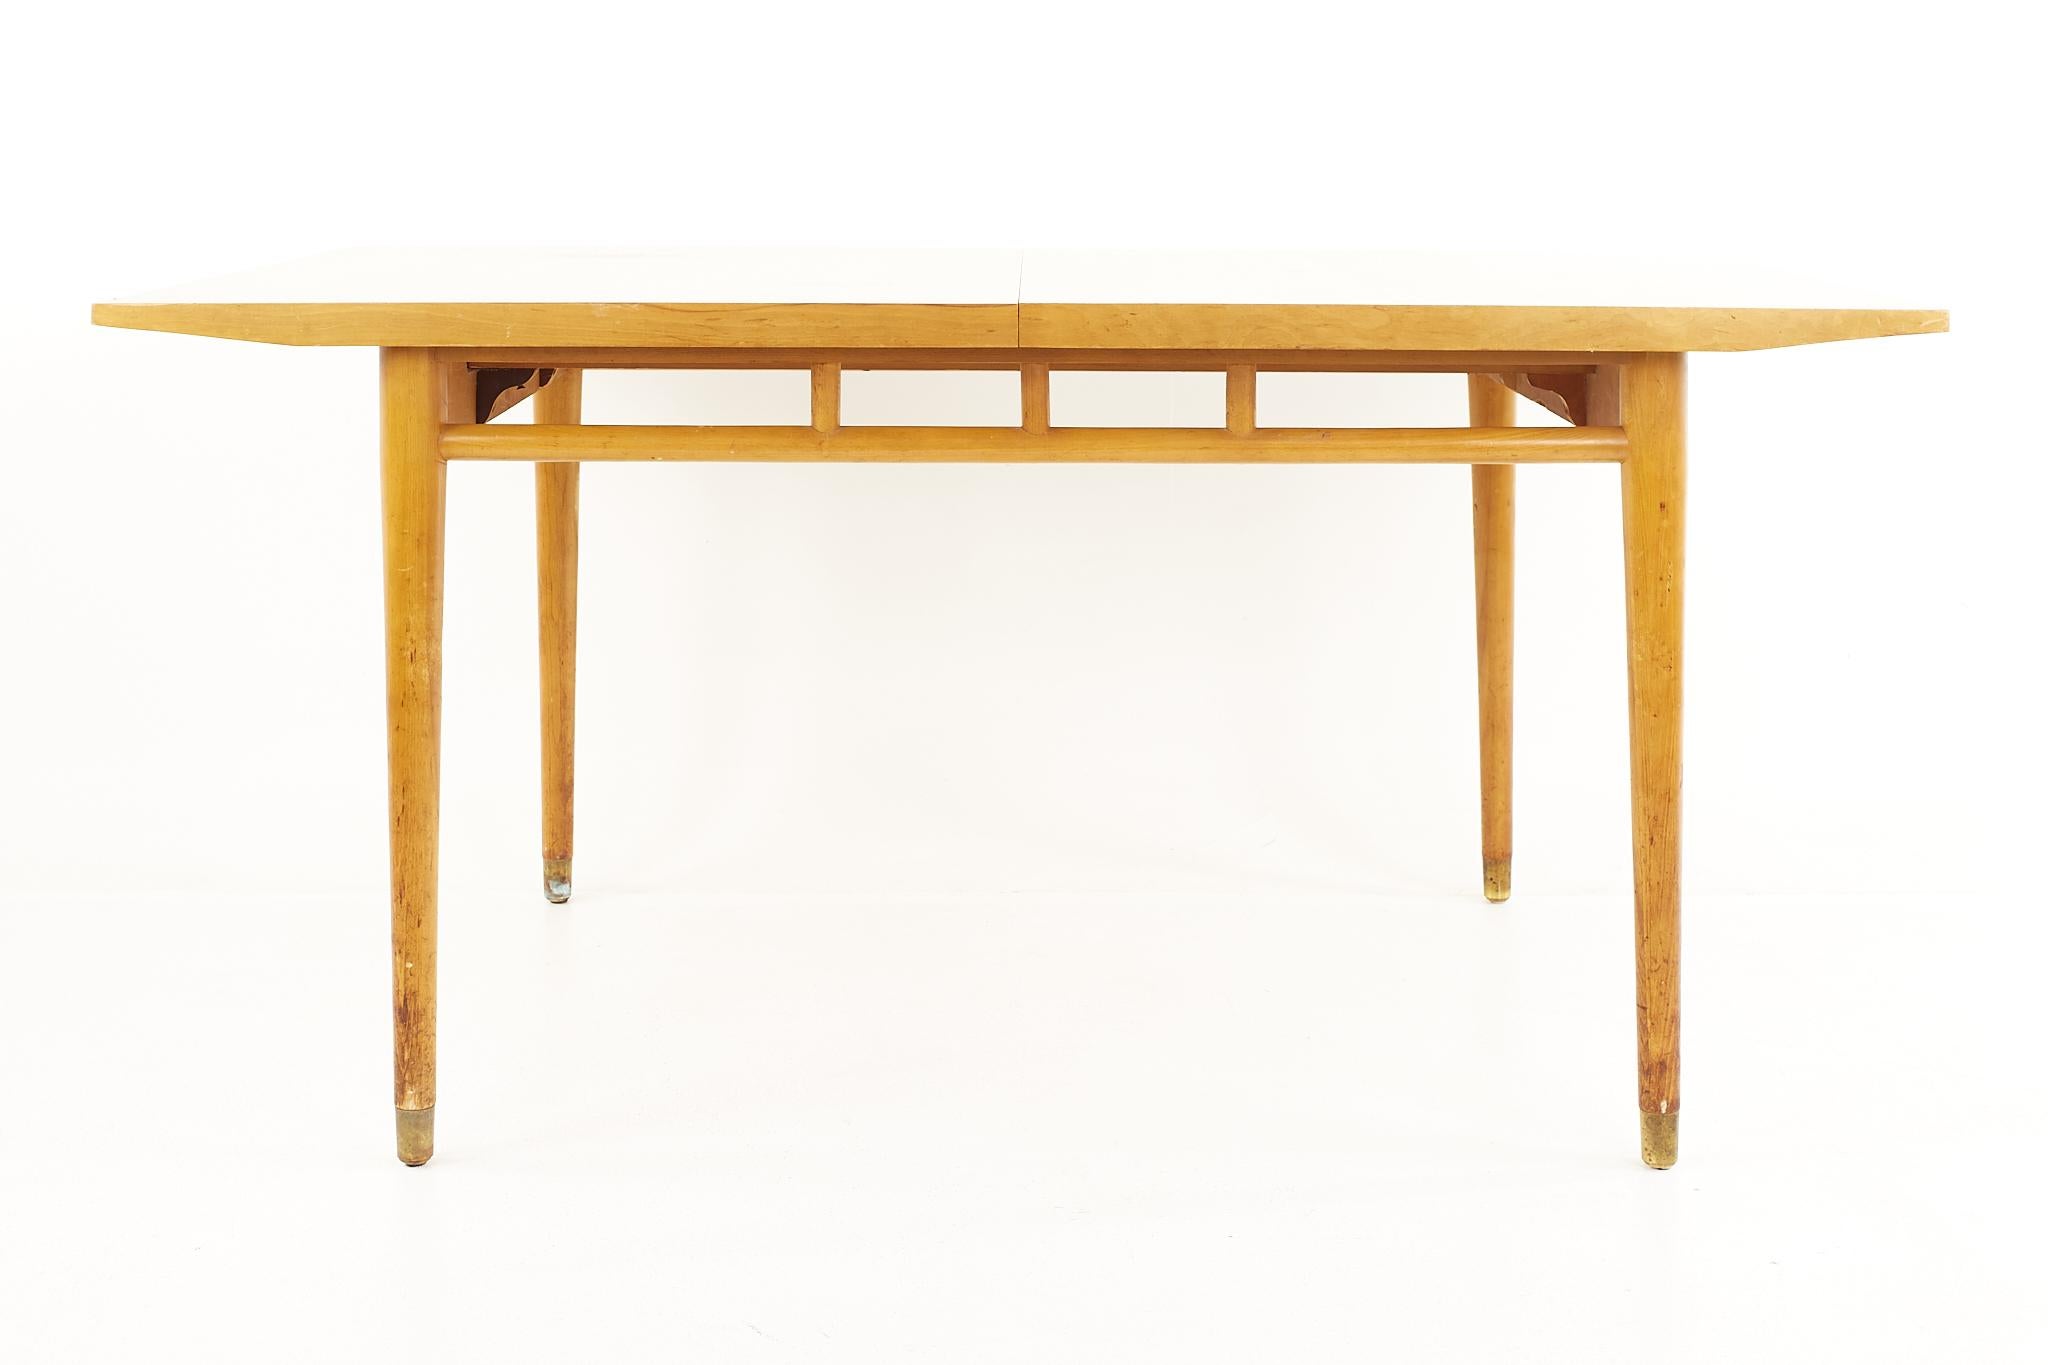 Milo Baughman for Drexel todays living Mid Century dining table with 3 leaves

The table measures: 62 wide x 40 deep x 29.5 high, with a chair clearance of 23.75 inches; each leaf measures 12 inches wide, making a maximum table width of 98 inches